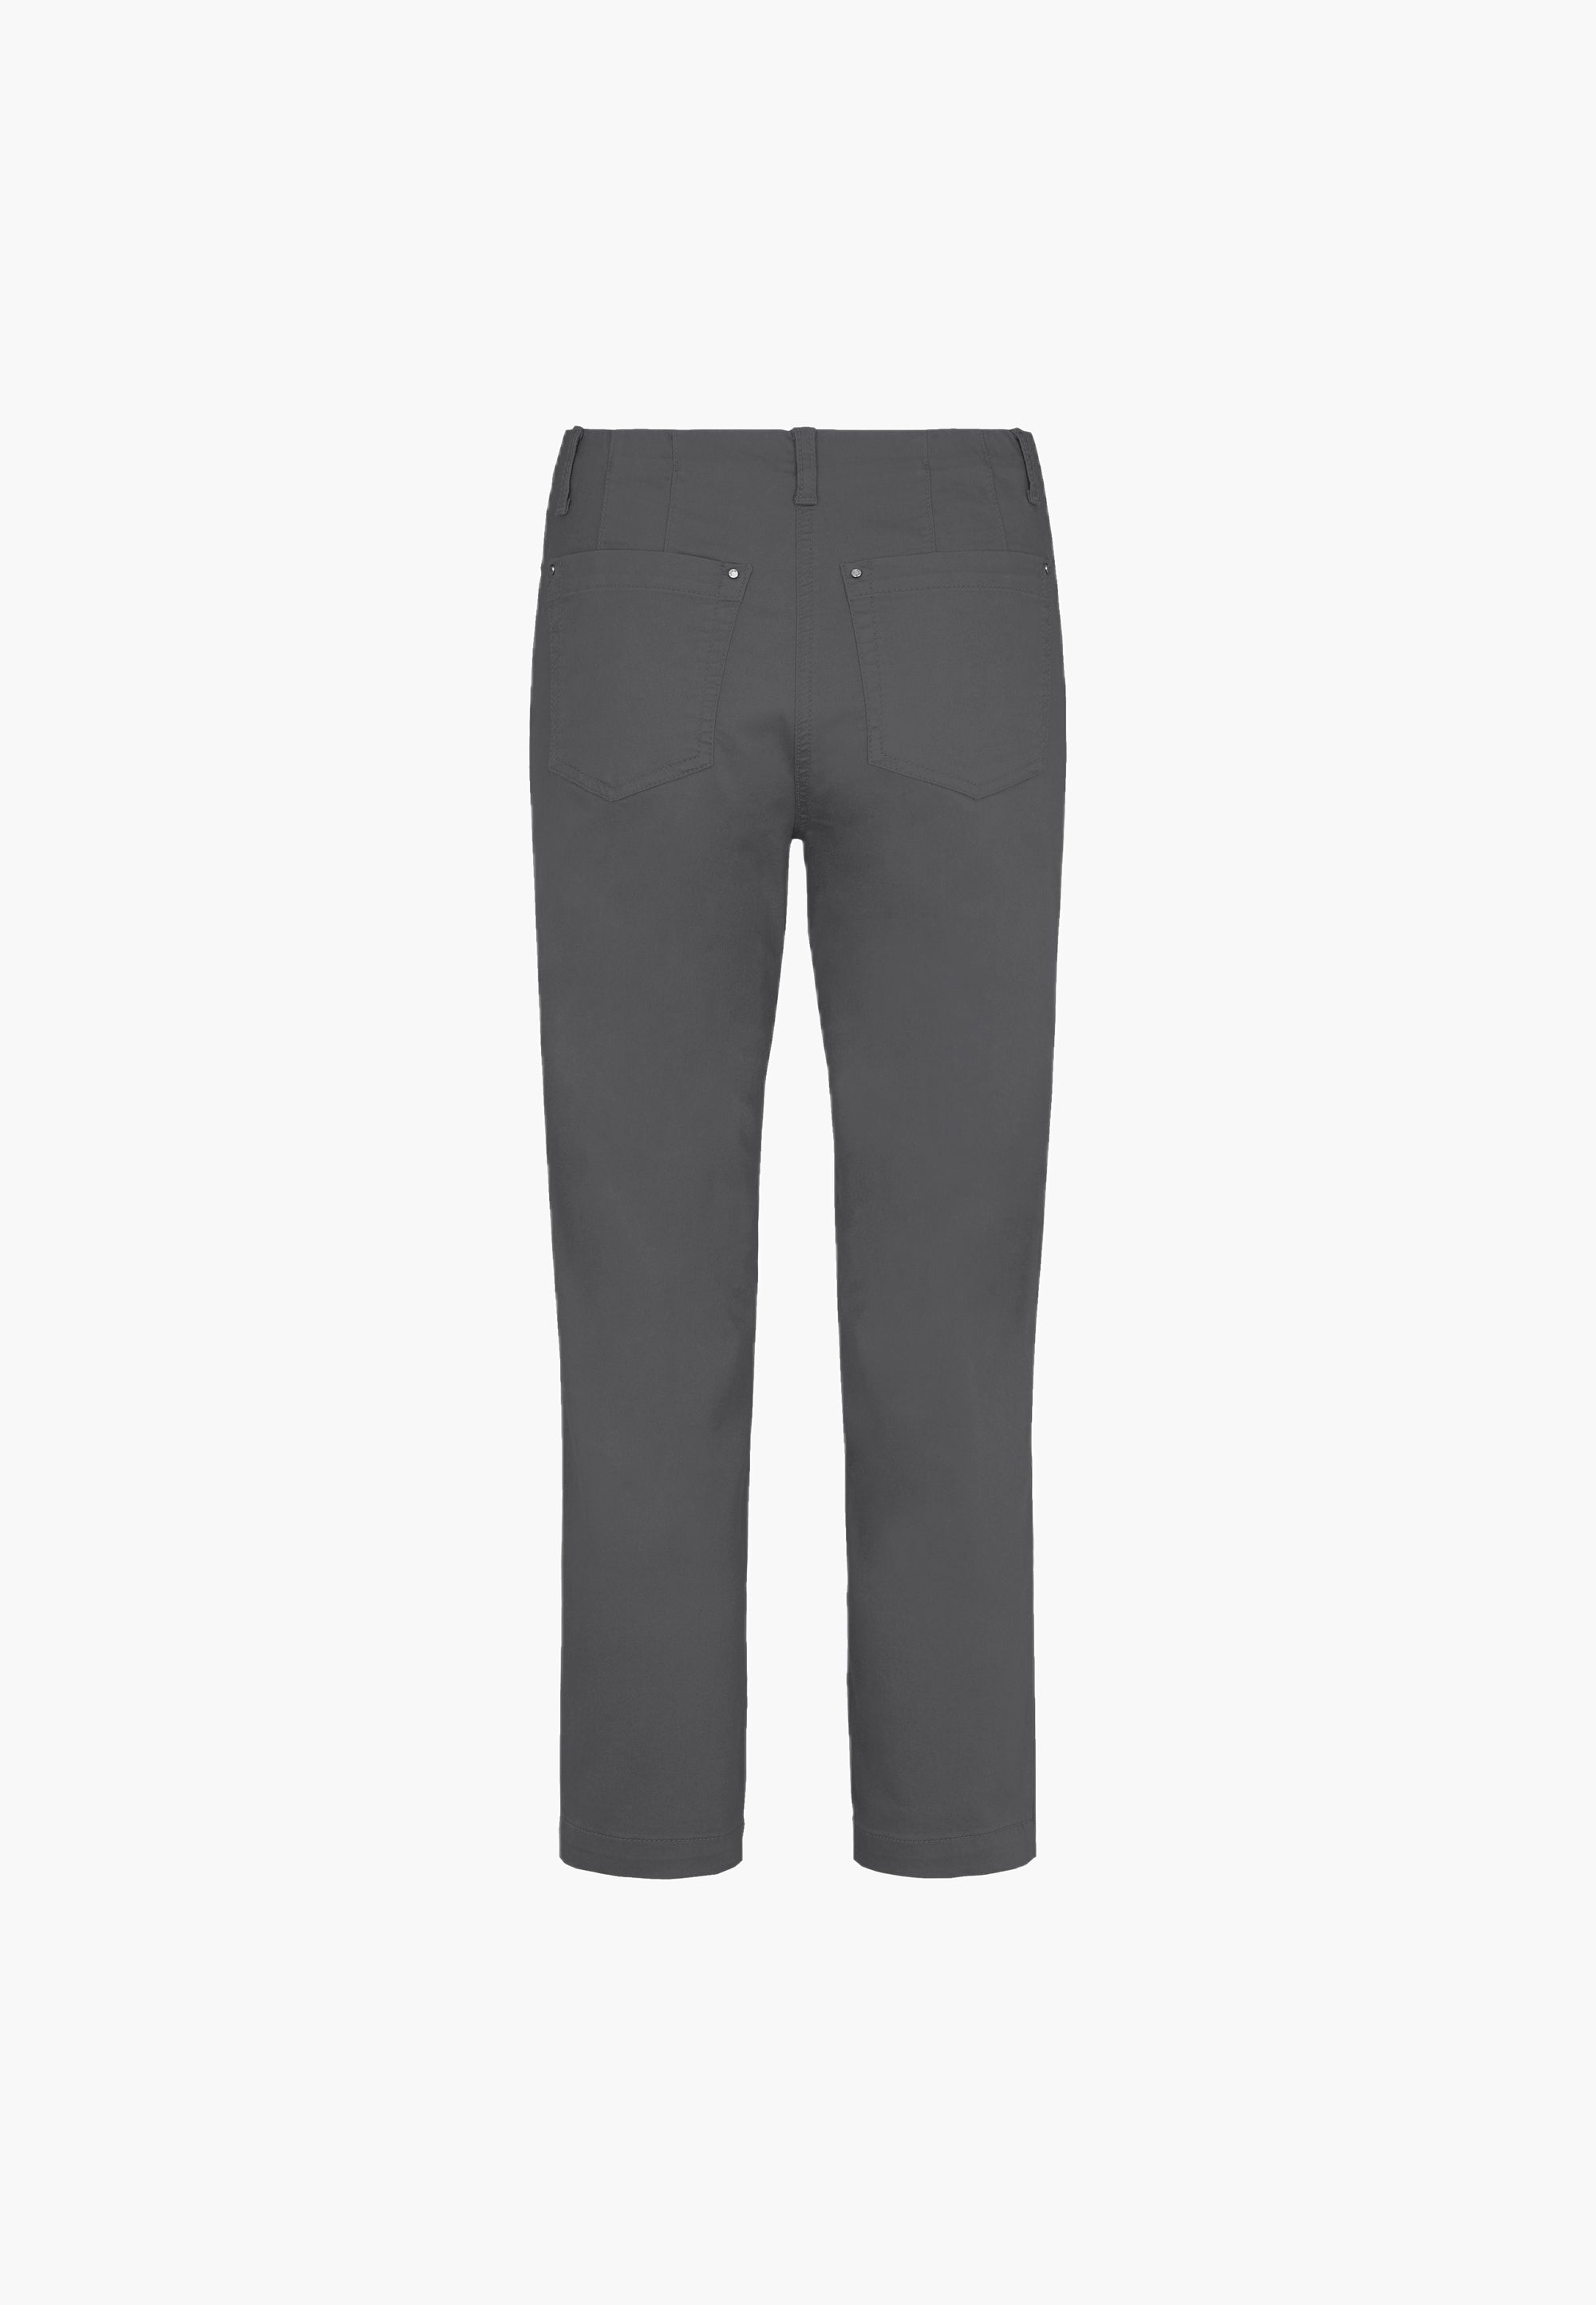 LAURIE Piper Regular Crop Trousers REGULAR 97000 Anthracite